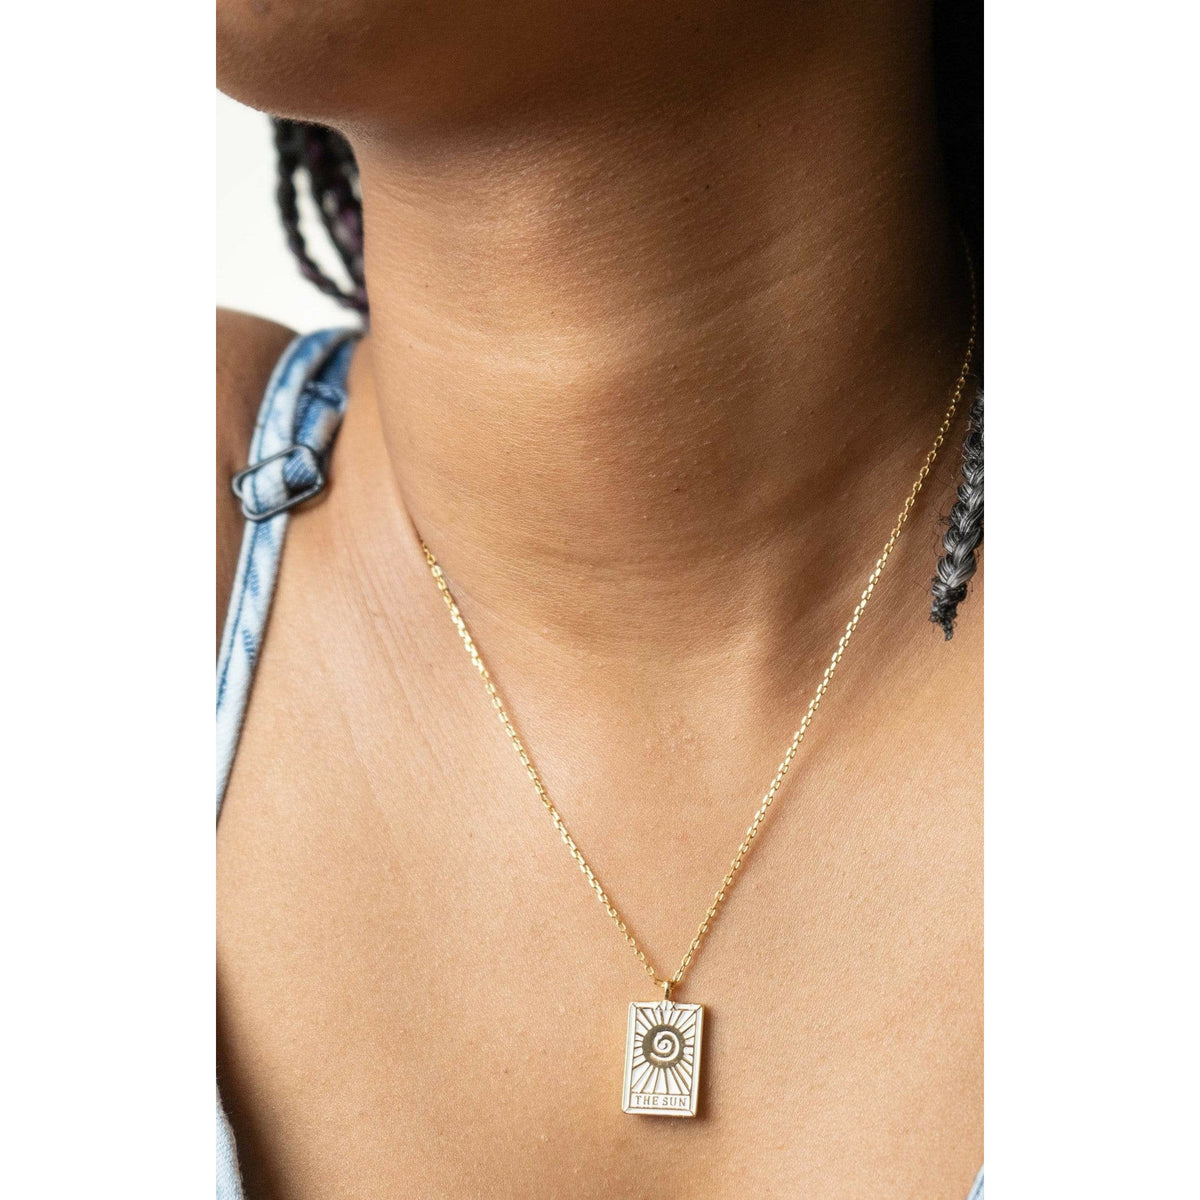 Buy 22 CARDS: Dainty Tarot Card Sterling Silver Charm Necklace Best Friend  Birthday Gift Tarot Card Necklace Mystic Halloween Jewelry Online in India  - Etsy